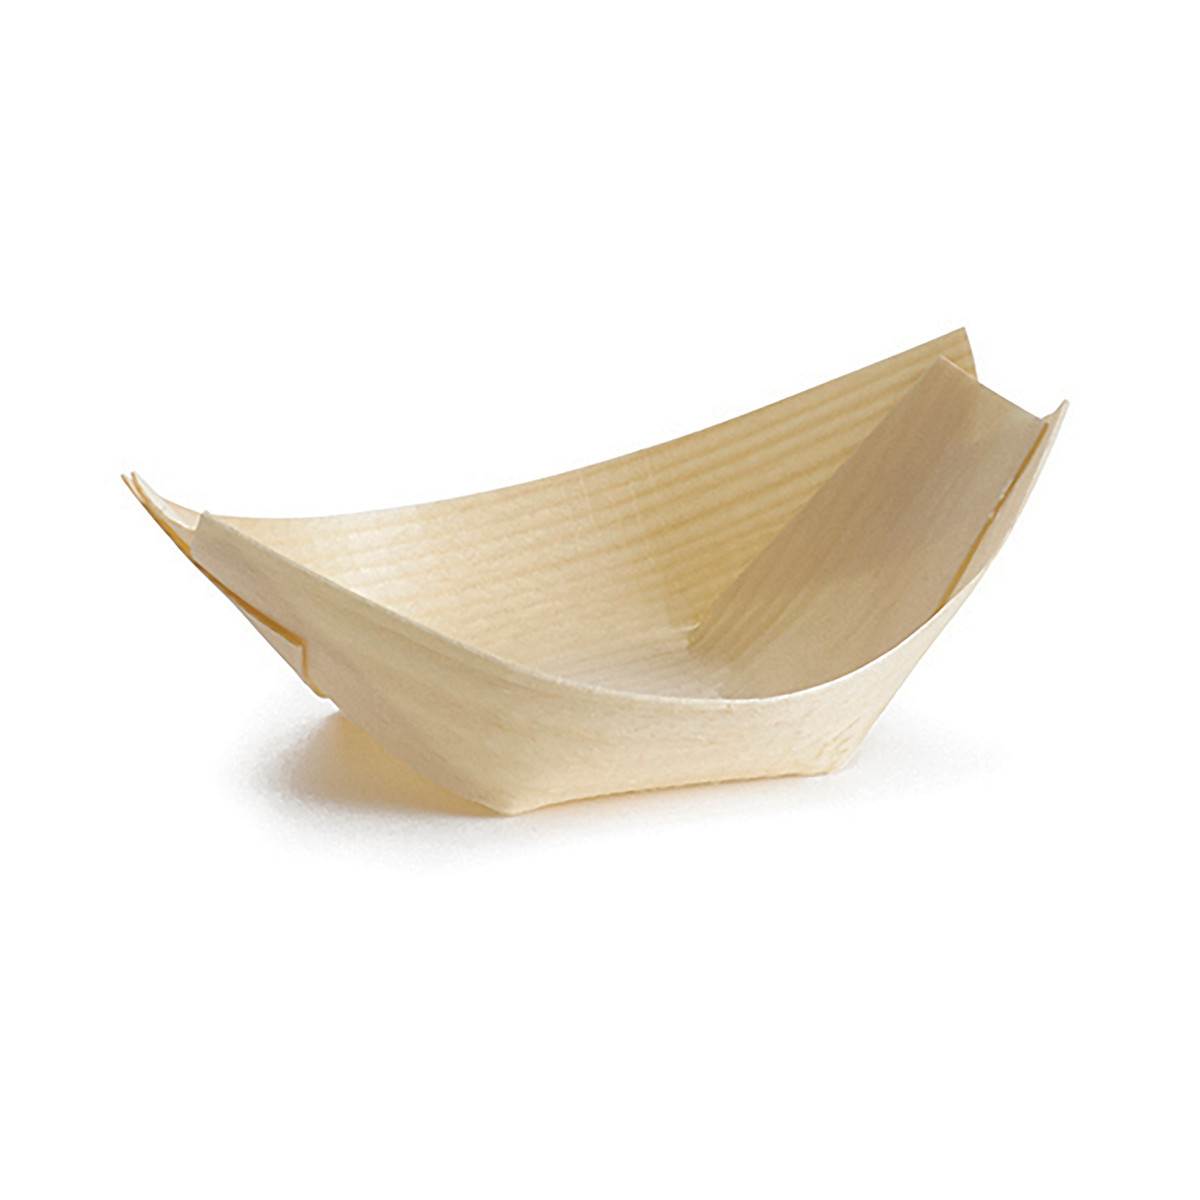 Small Wooden Disposable Boat (x50) 8.5 x 5.5 x 2.5cm